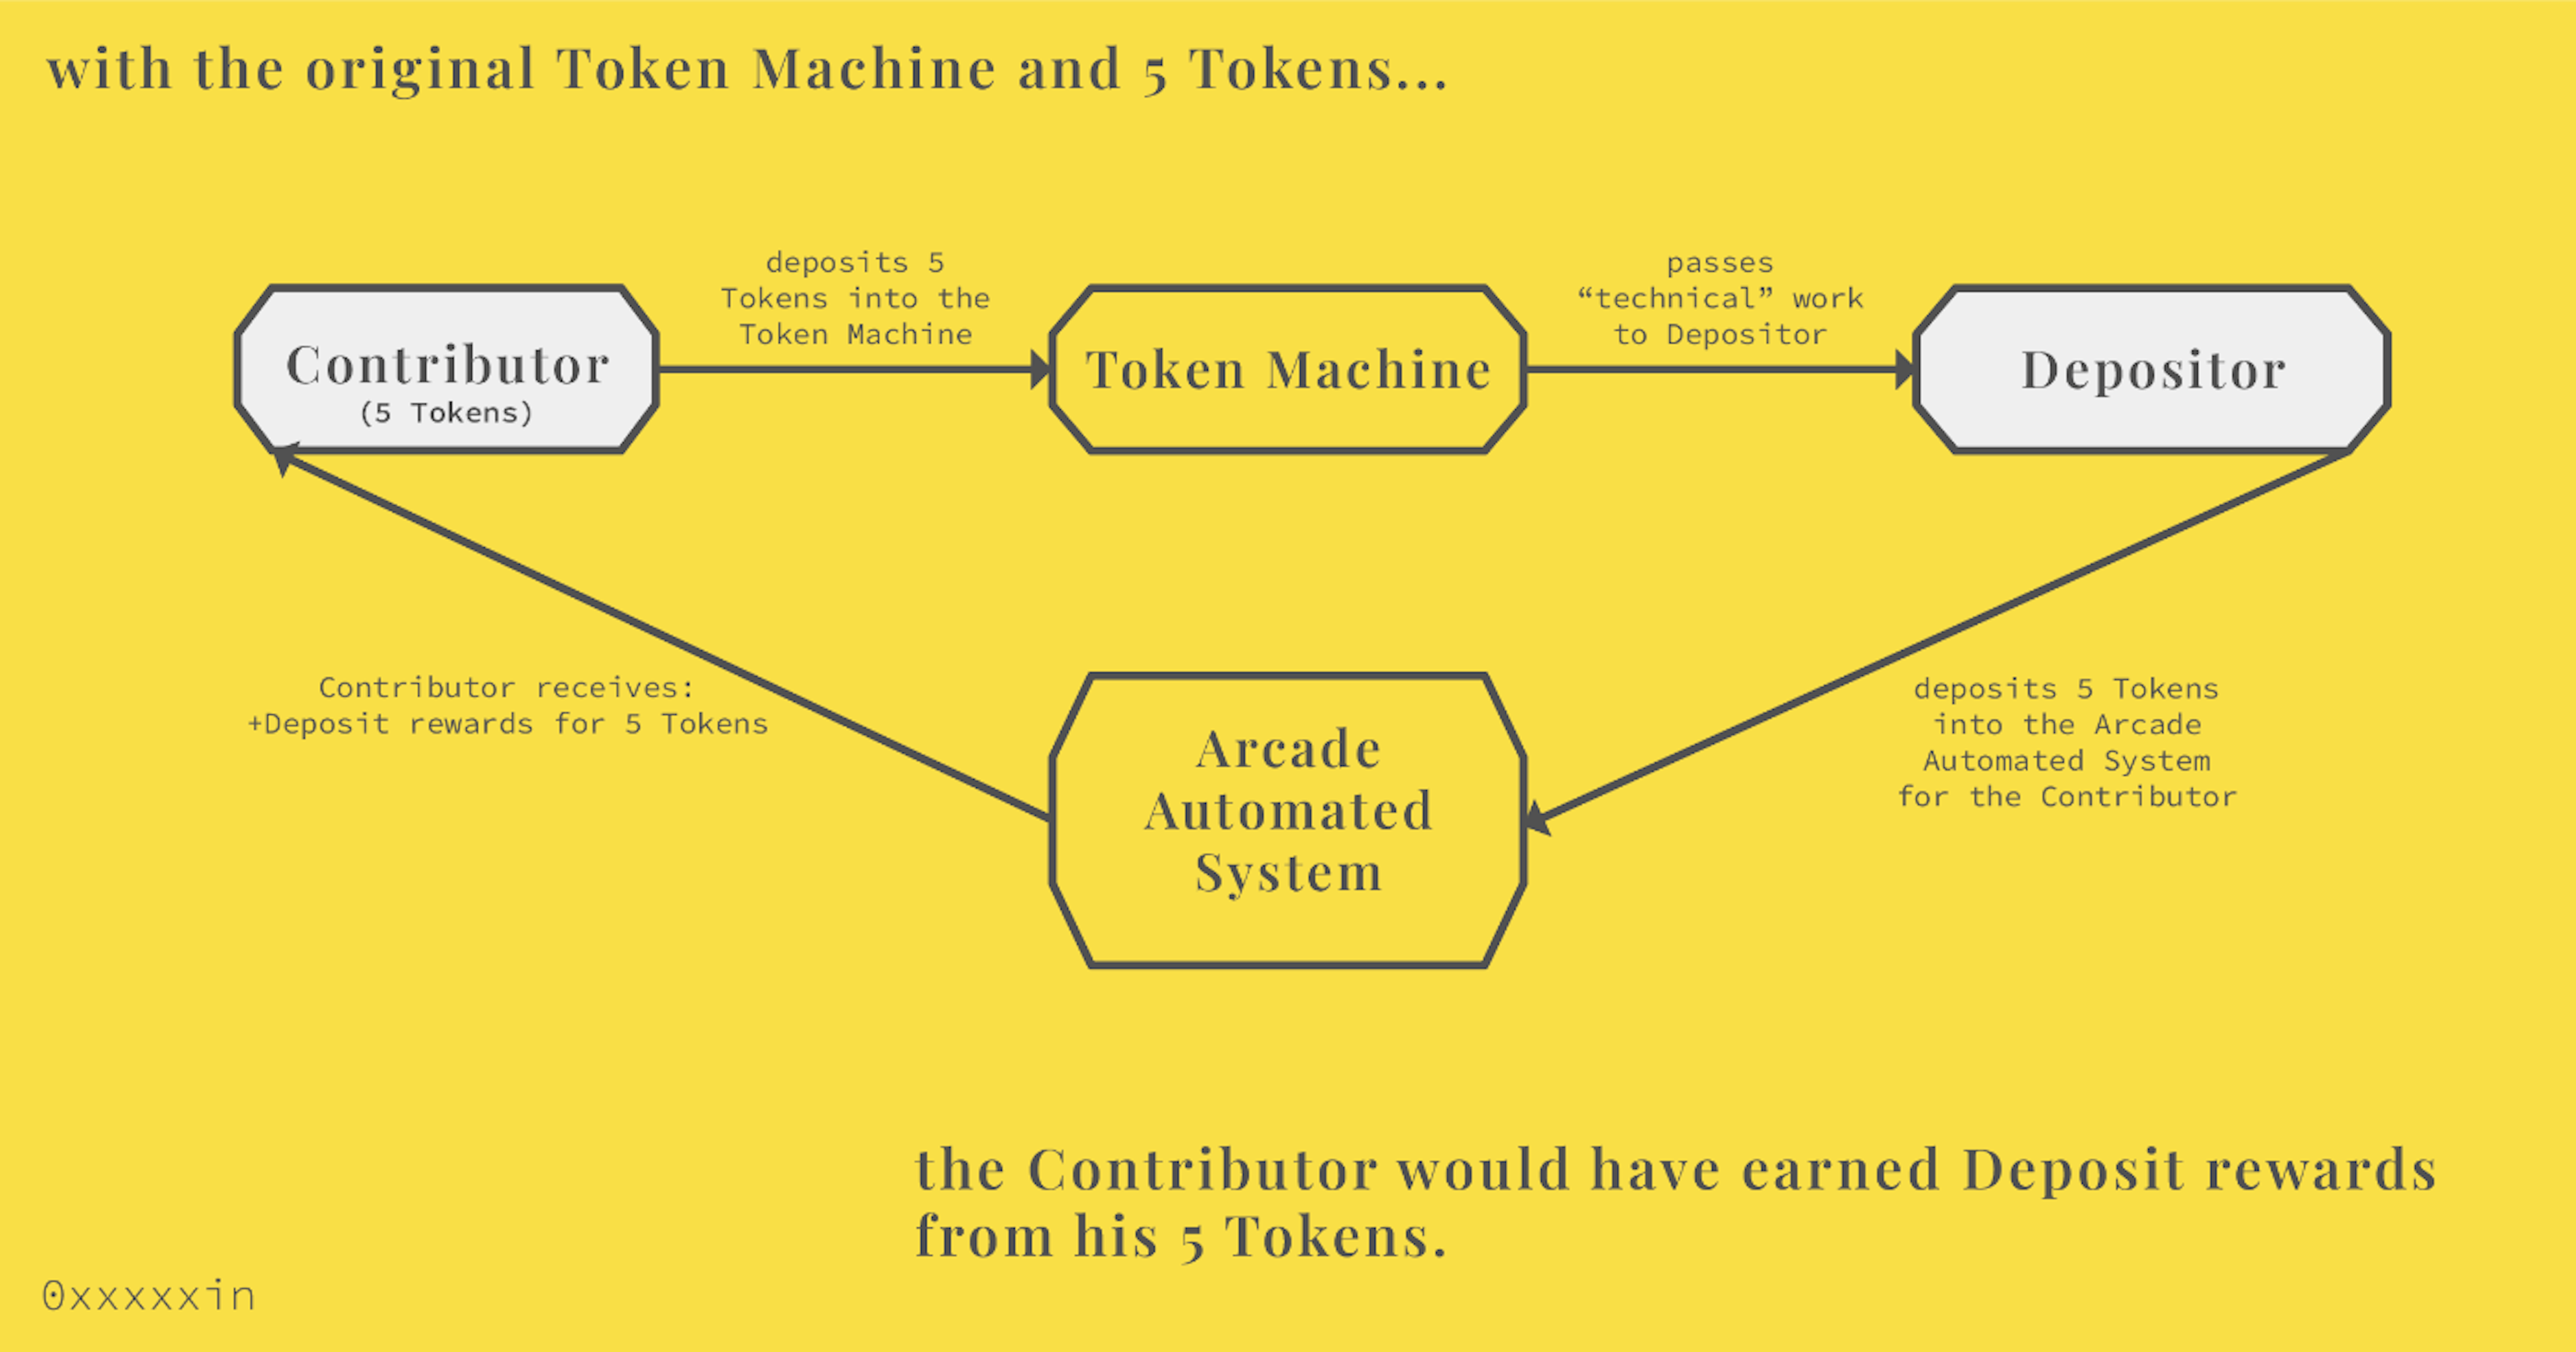 fig 1: Contributor user experience with OG Token Machine